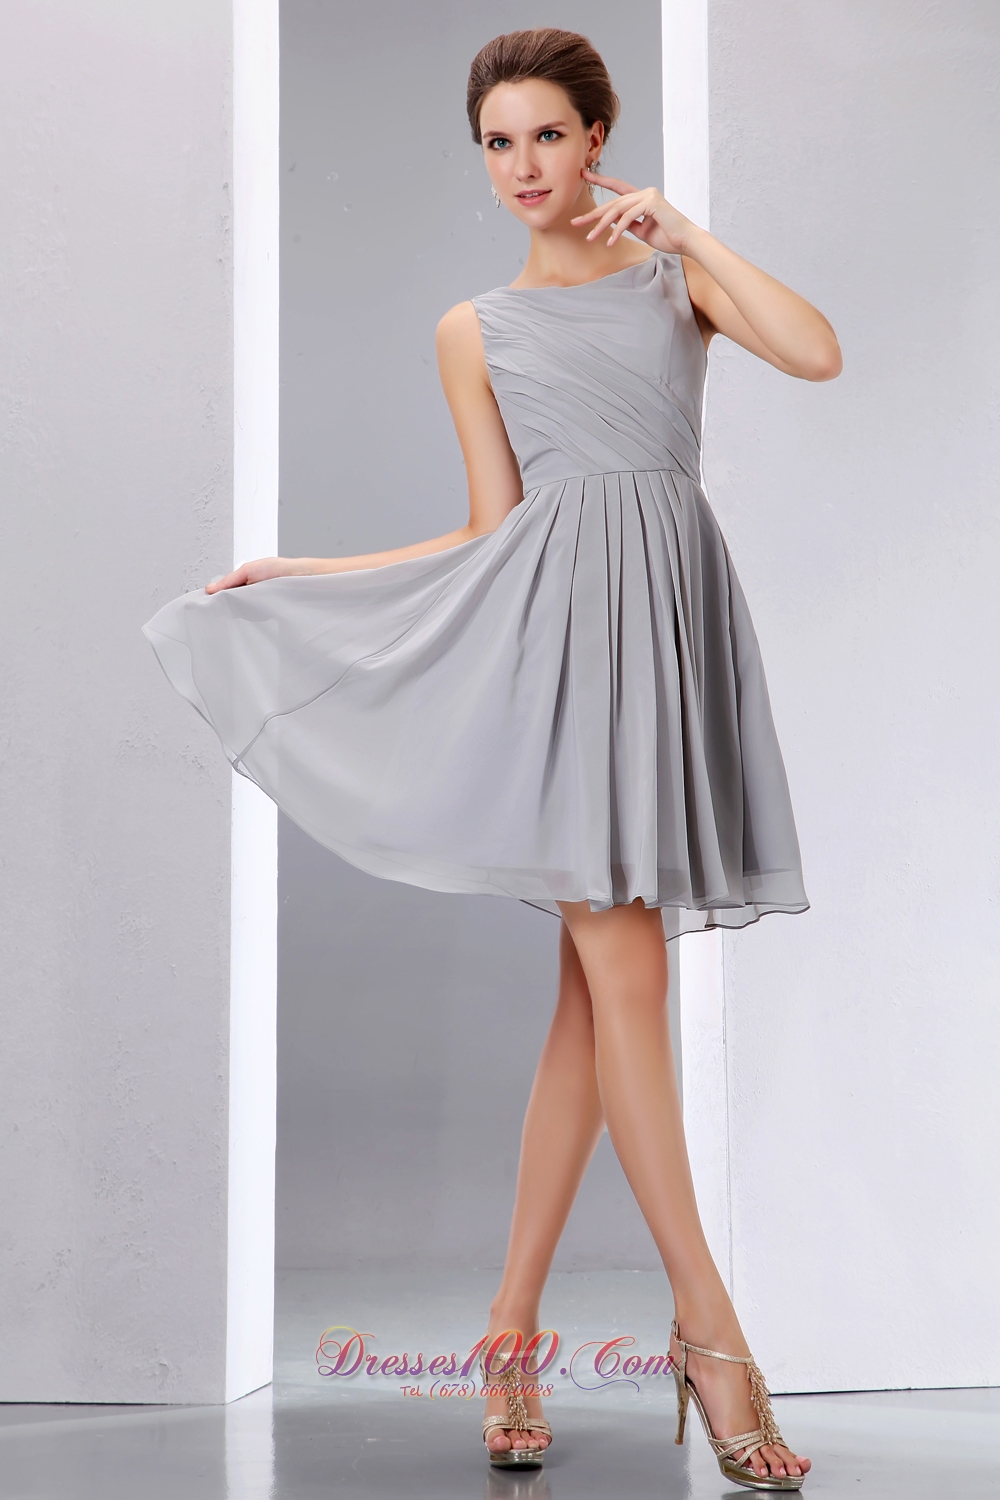 ... Prom Dresses, Scoop Grey Chiffon Short Ruched Cocktail Dama Dress